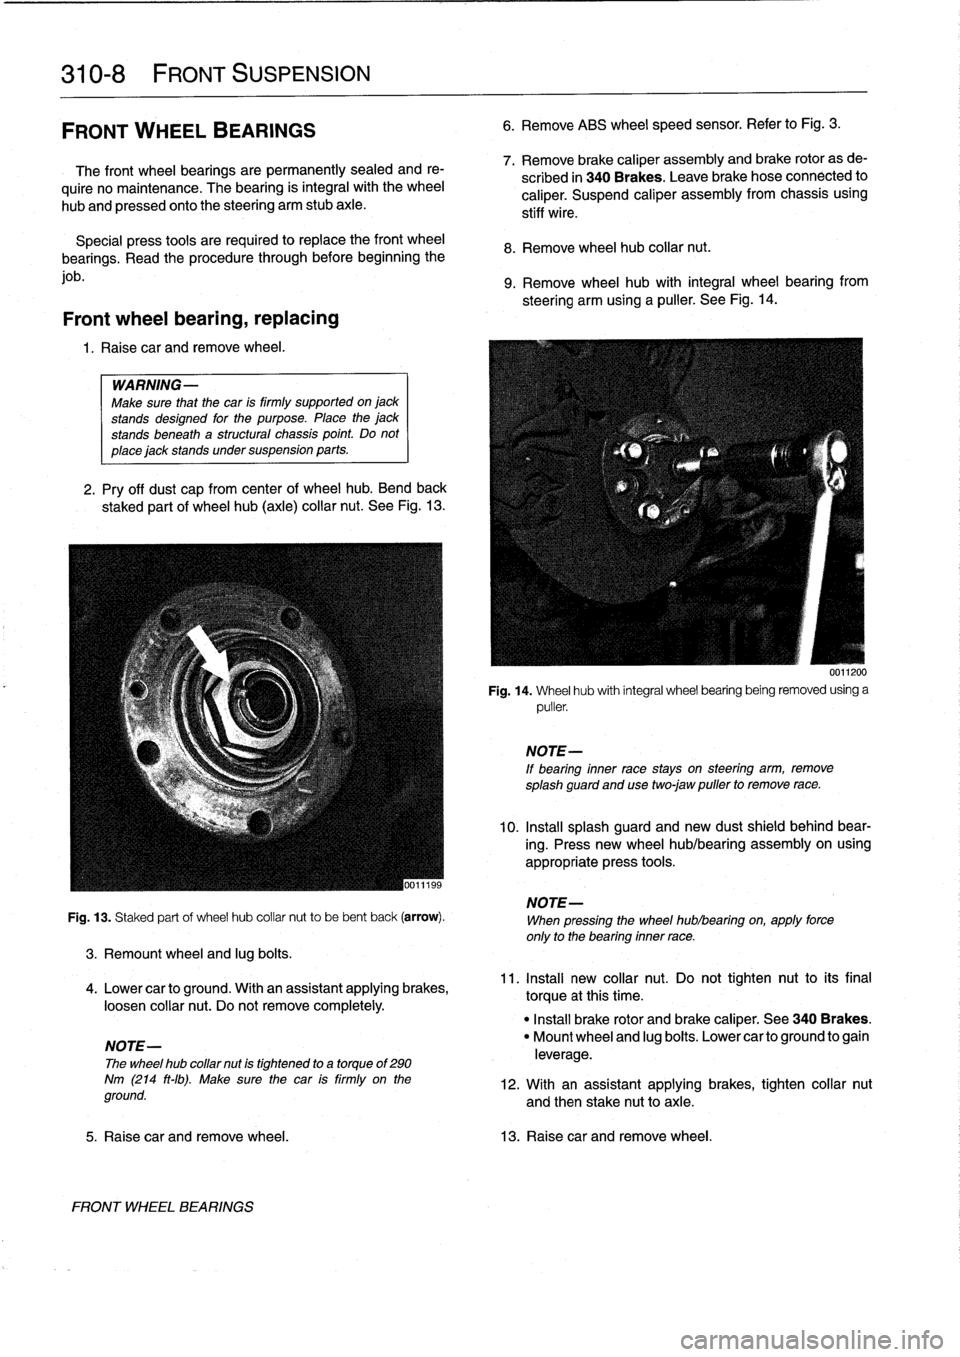 BMW 328i 1994 E36 Owners Guide 
310-
8

	

FRONT
SUSPENSION

FRONT
WHEEL
BEARINGS

The
front
wheel
bearings
are
permanently
sealed
and
re-

quire
no
maintenance
.
The
bearing
is
integral
with
the
wheel

hub
and
pressed
onto
the
ste